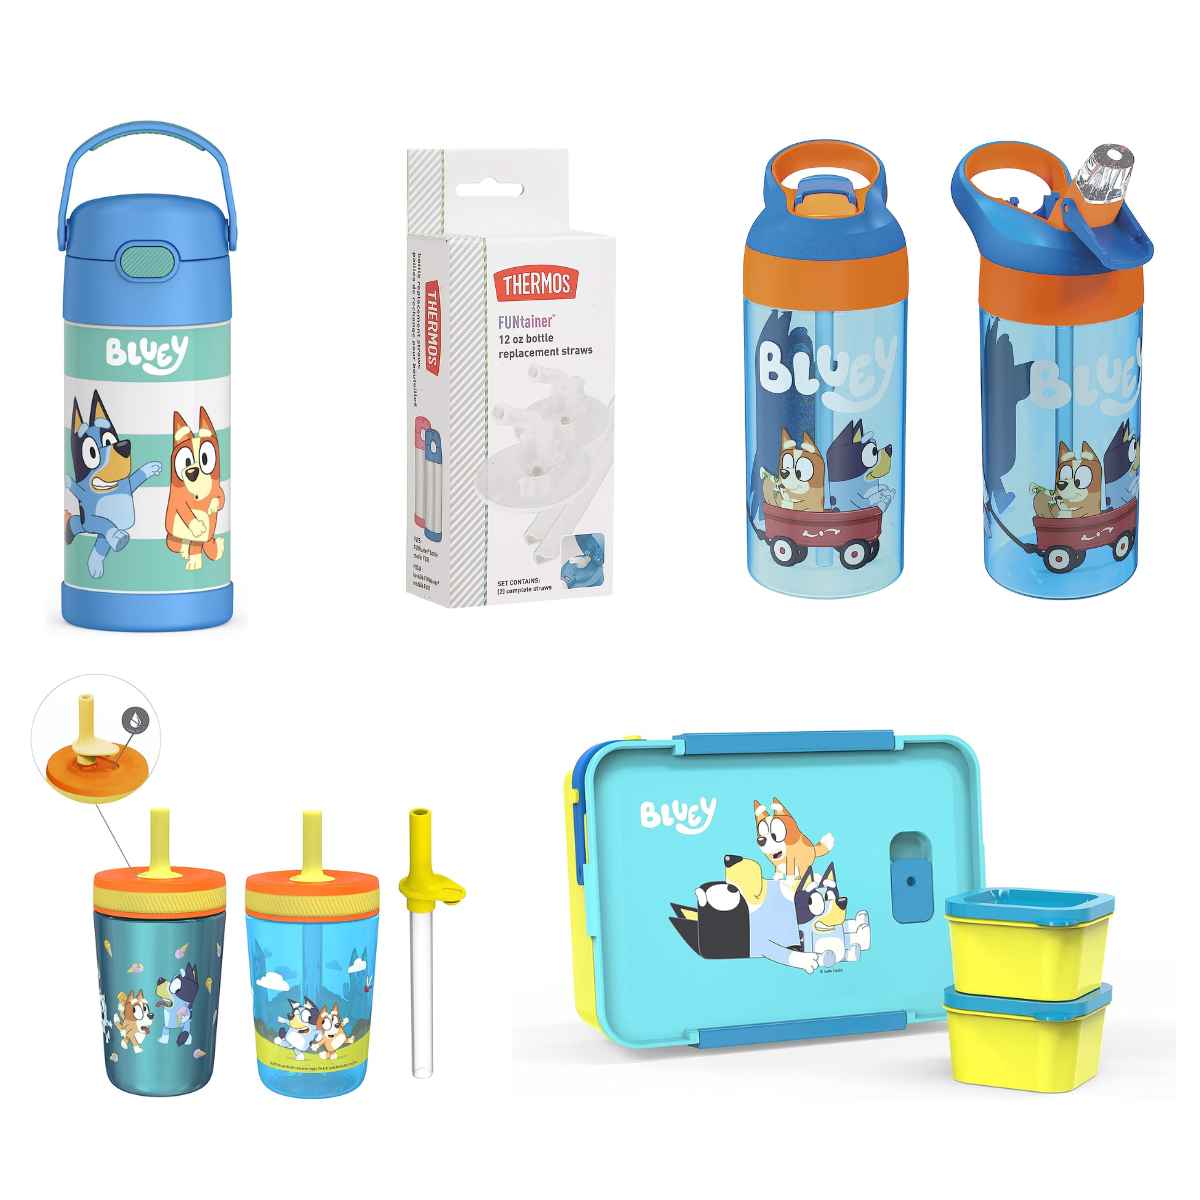 Bluey themed Water bottles and Lunchbox $10 to $13